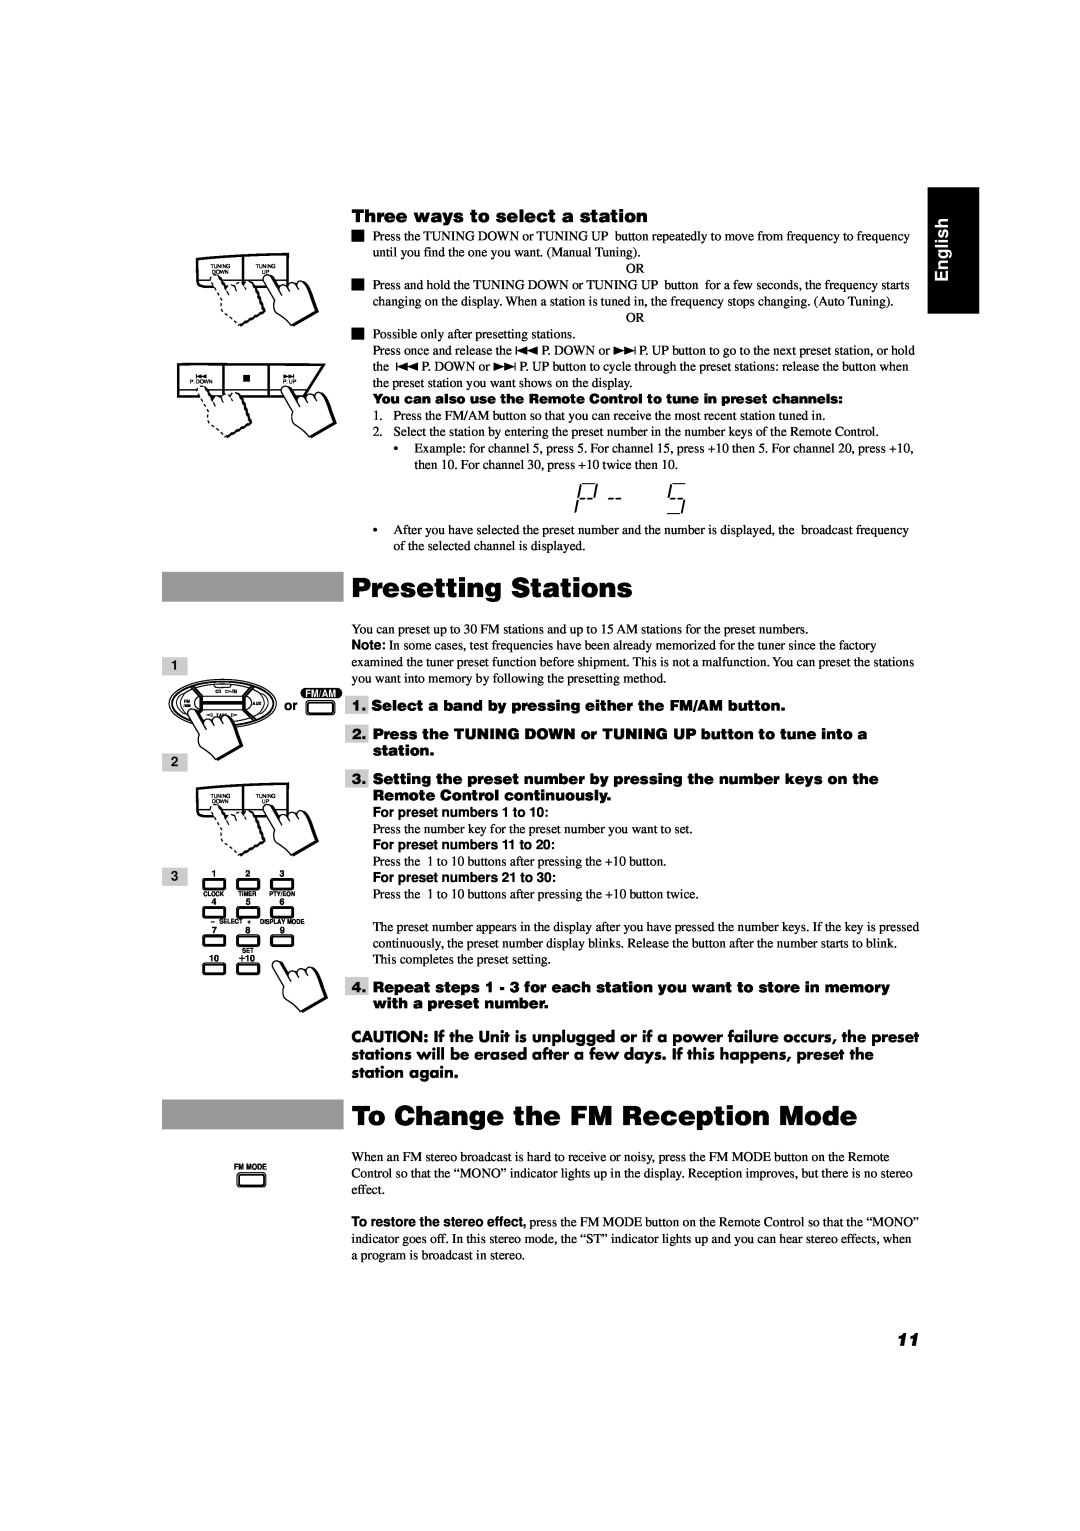 JVC CA-D551TR, CA-D351TR Presetting Stations, To Change the FM Reception Mode, Three ways to select a station, English 